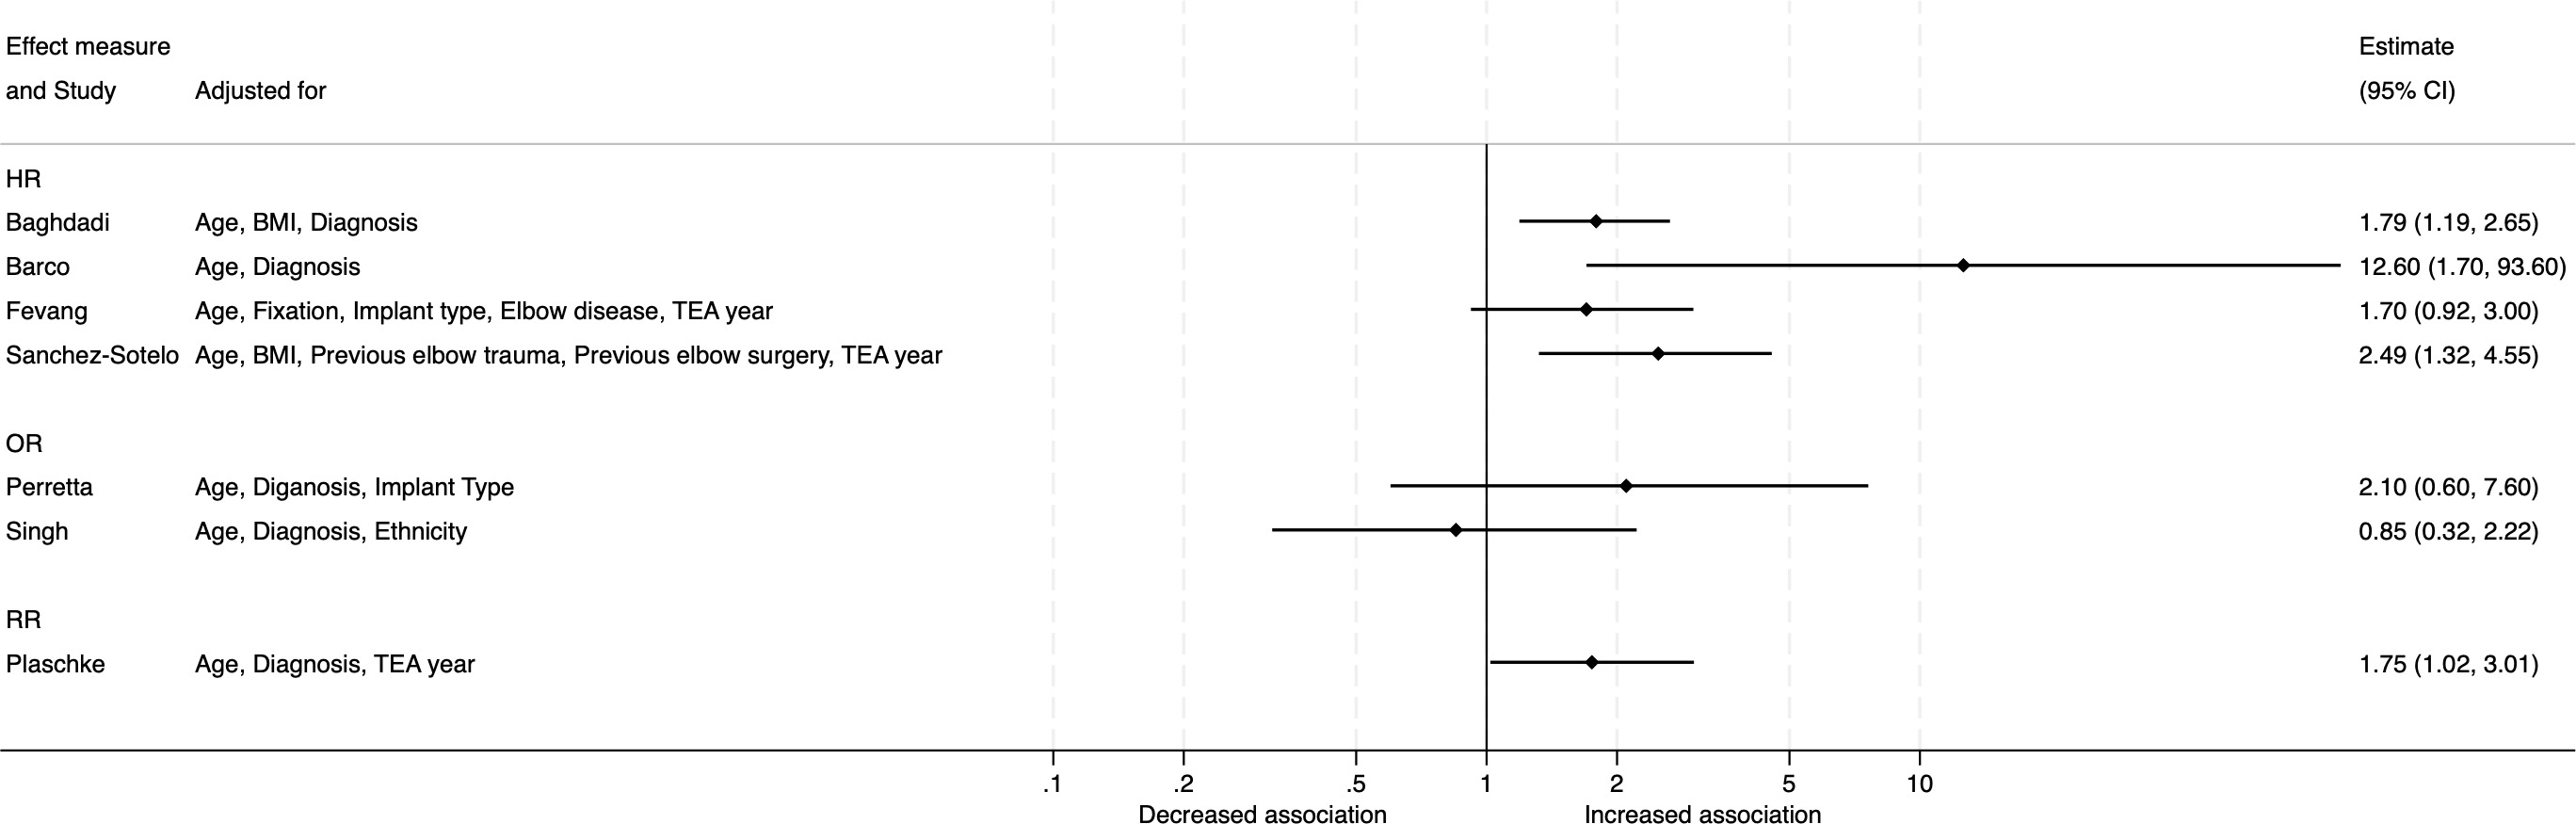 Fig. 4 
            The association between male sex and failure of total elbow arthroplasty (TEA) requiring revision in multivariable analyses. The overall effect estimate is not reported due to low quality of the evidence and the heterogeneous nature of the studies. CI, confidence interval; HR, hazard ratio; OR, odds ratio; RR, risk ratio.
          